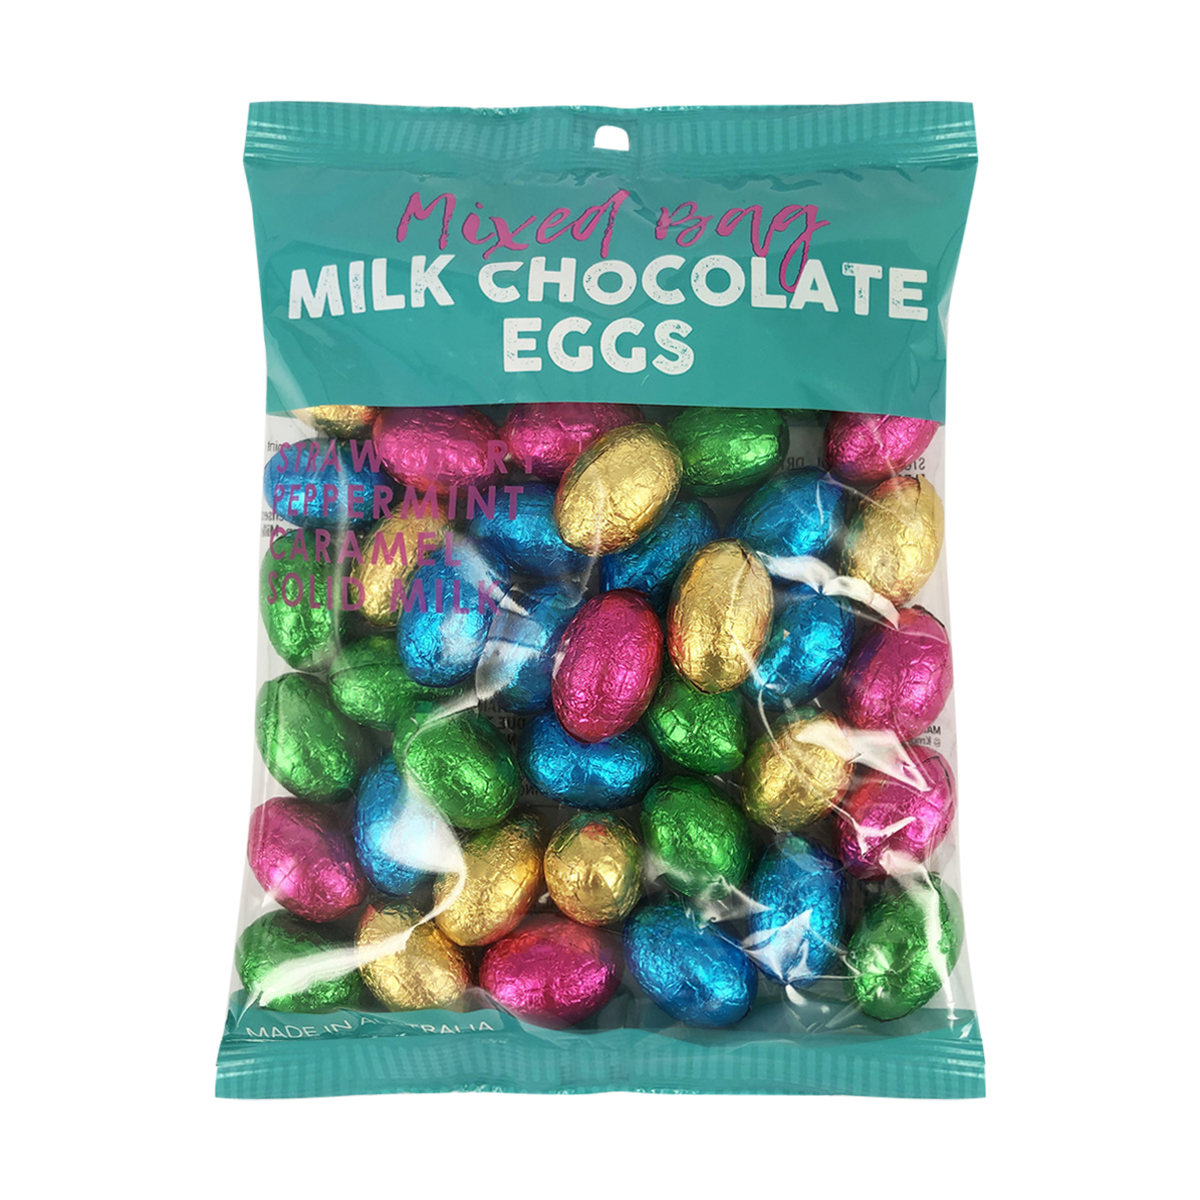 A plastic pack of Kmart brand Mixed Bag Milk Chocolate Eggs (360g)